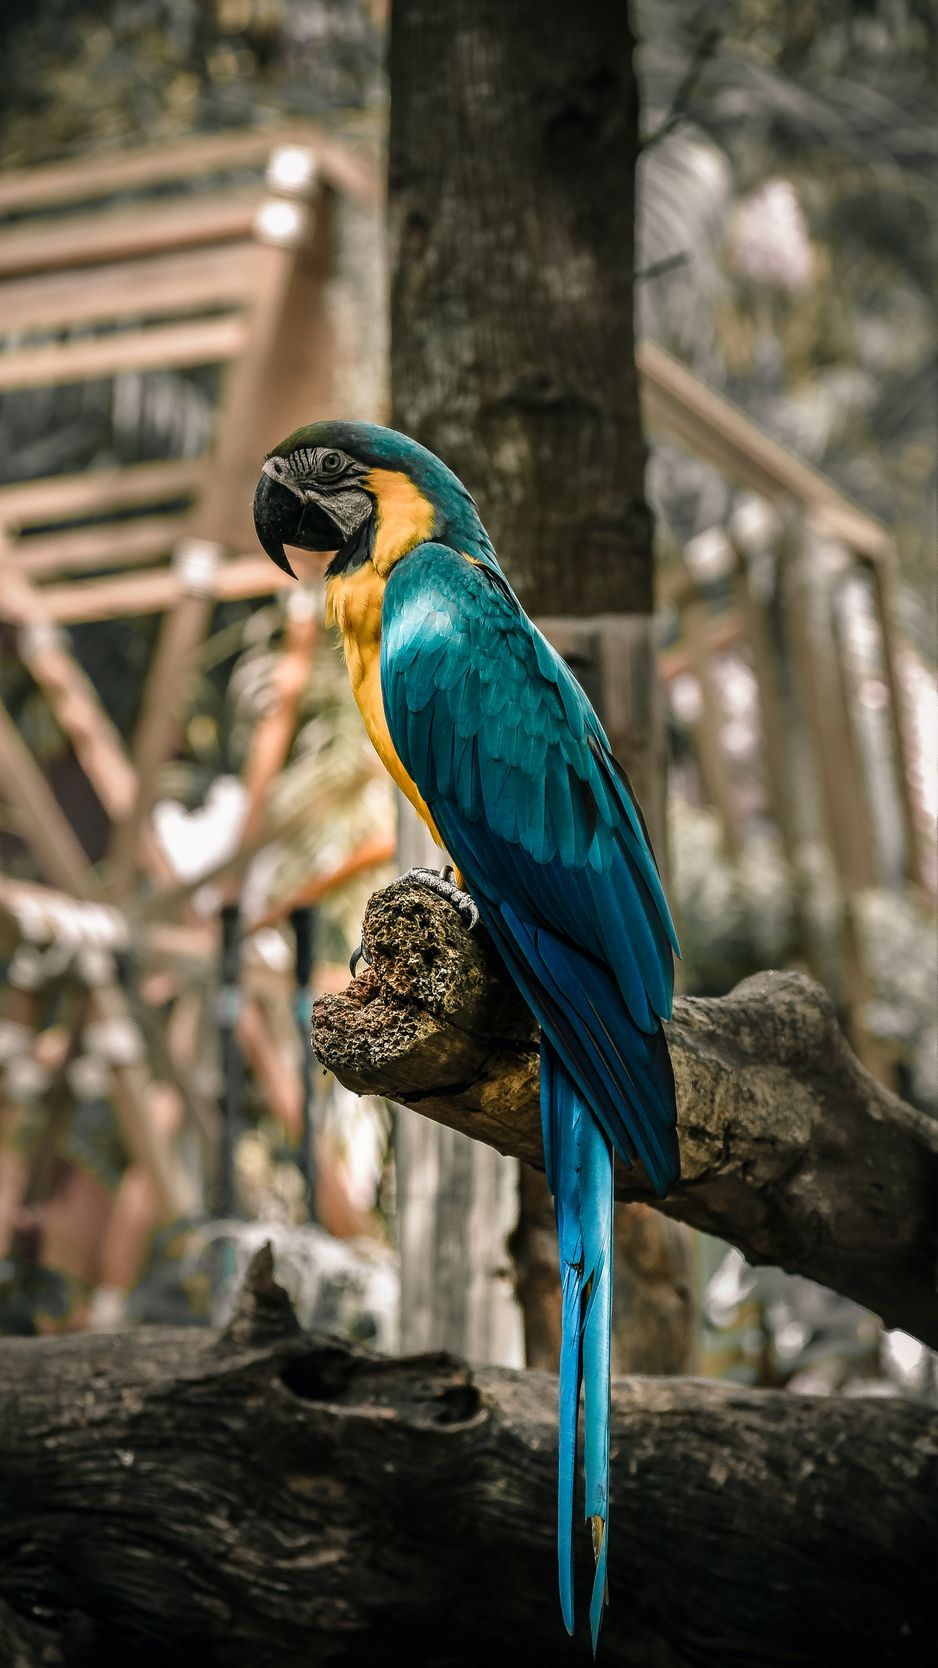 Download wallpaper 938x1668 macaw, parrot, birds, colorful, tree iphone  8/7/6s/6 for parallax hd background